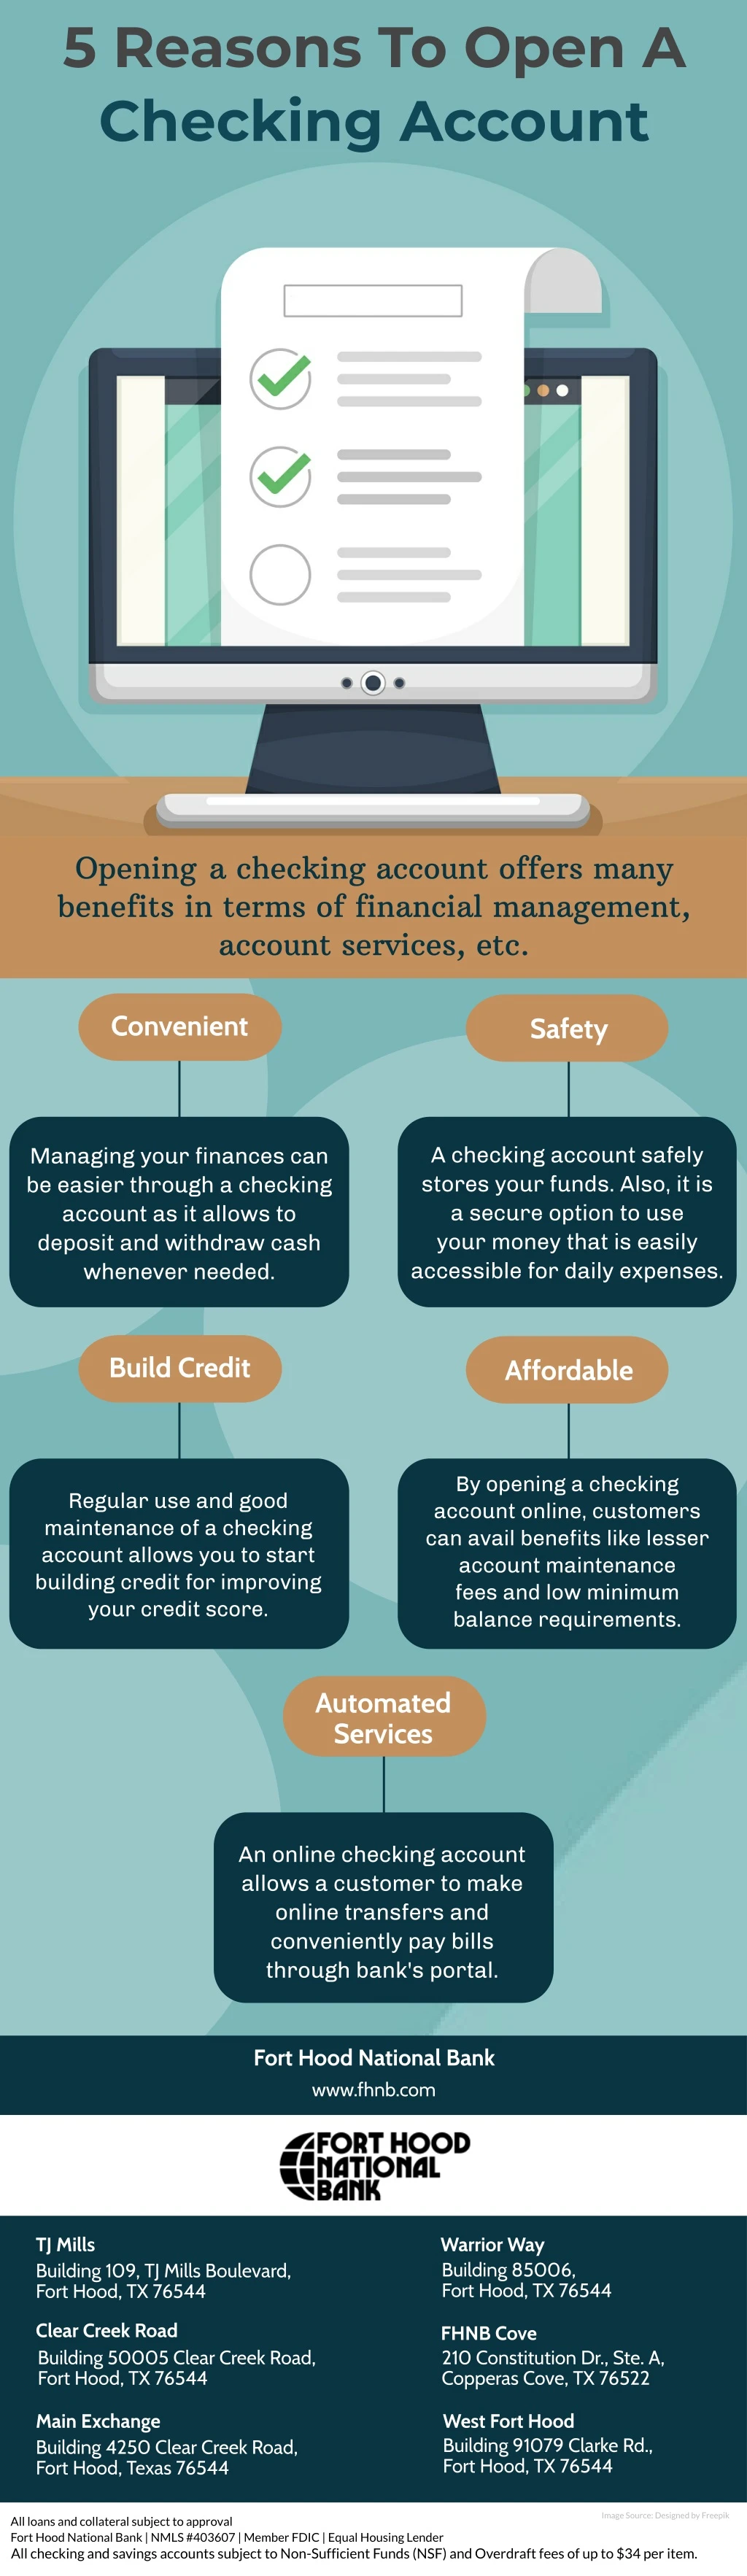 5 reasons to open a checking account